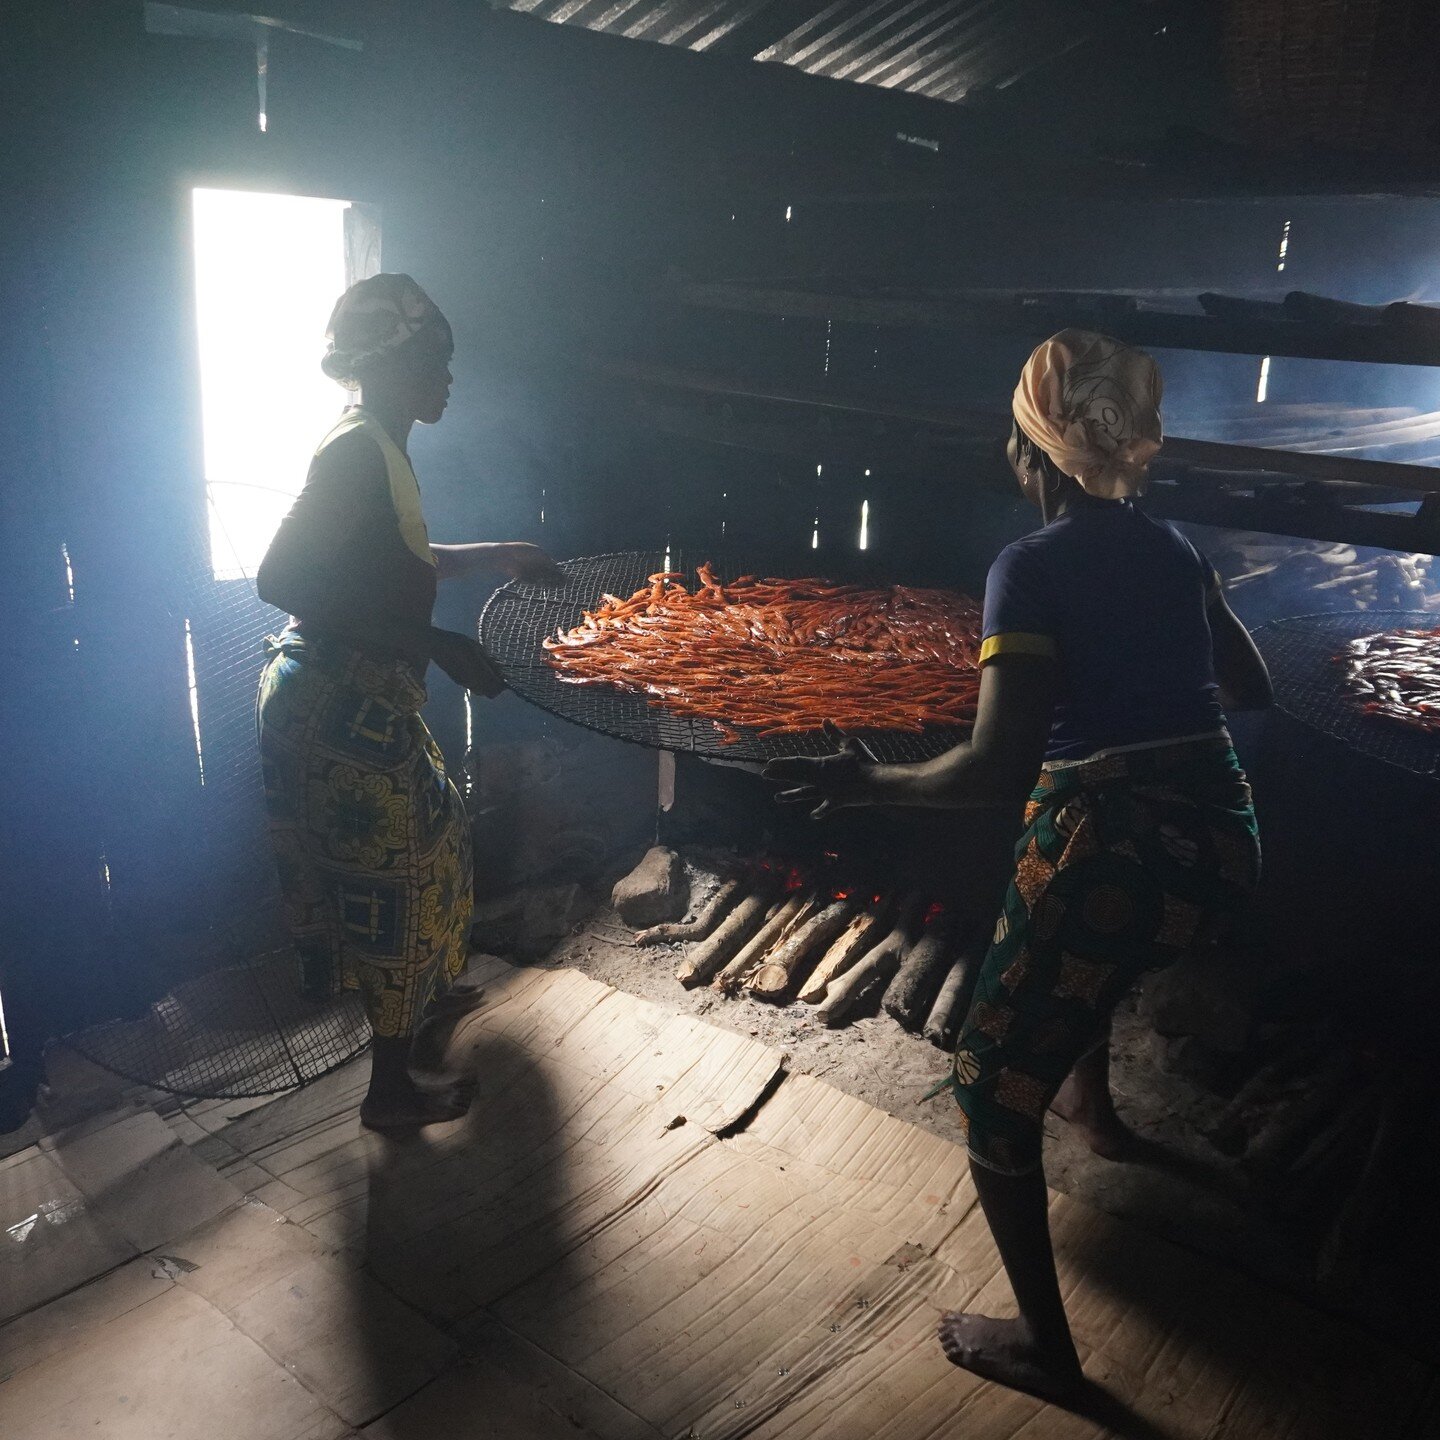 On #InternationalWomenDay we looked a women fish processing and fishmonger cooperatives in Benin. Here's a summary in pictures, with captions below (continues in comments). Click on the link in bio for the full article :)

1. Eug&eacute;nie Zannou an